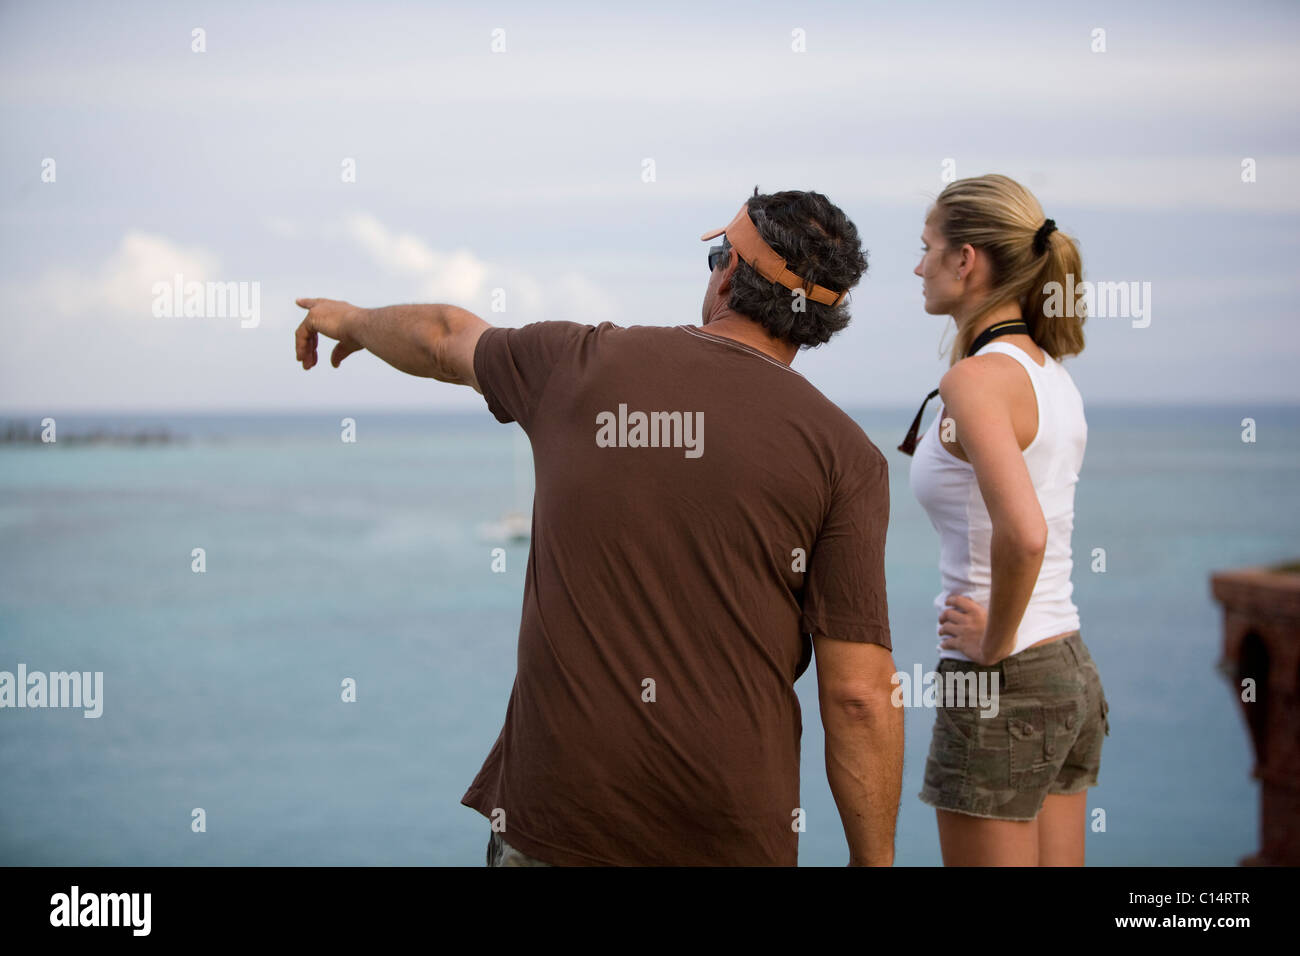 A man is pointing at something out in the distant blue water as a woman looks to see what it is. Stock Photo